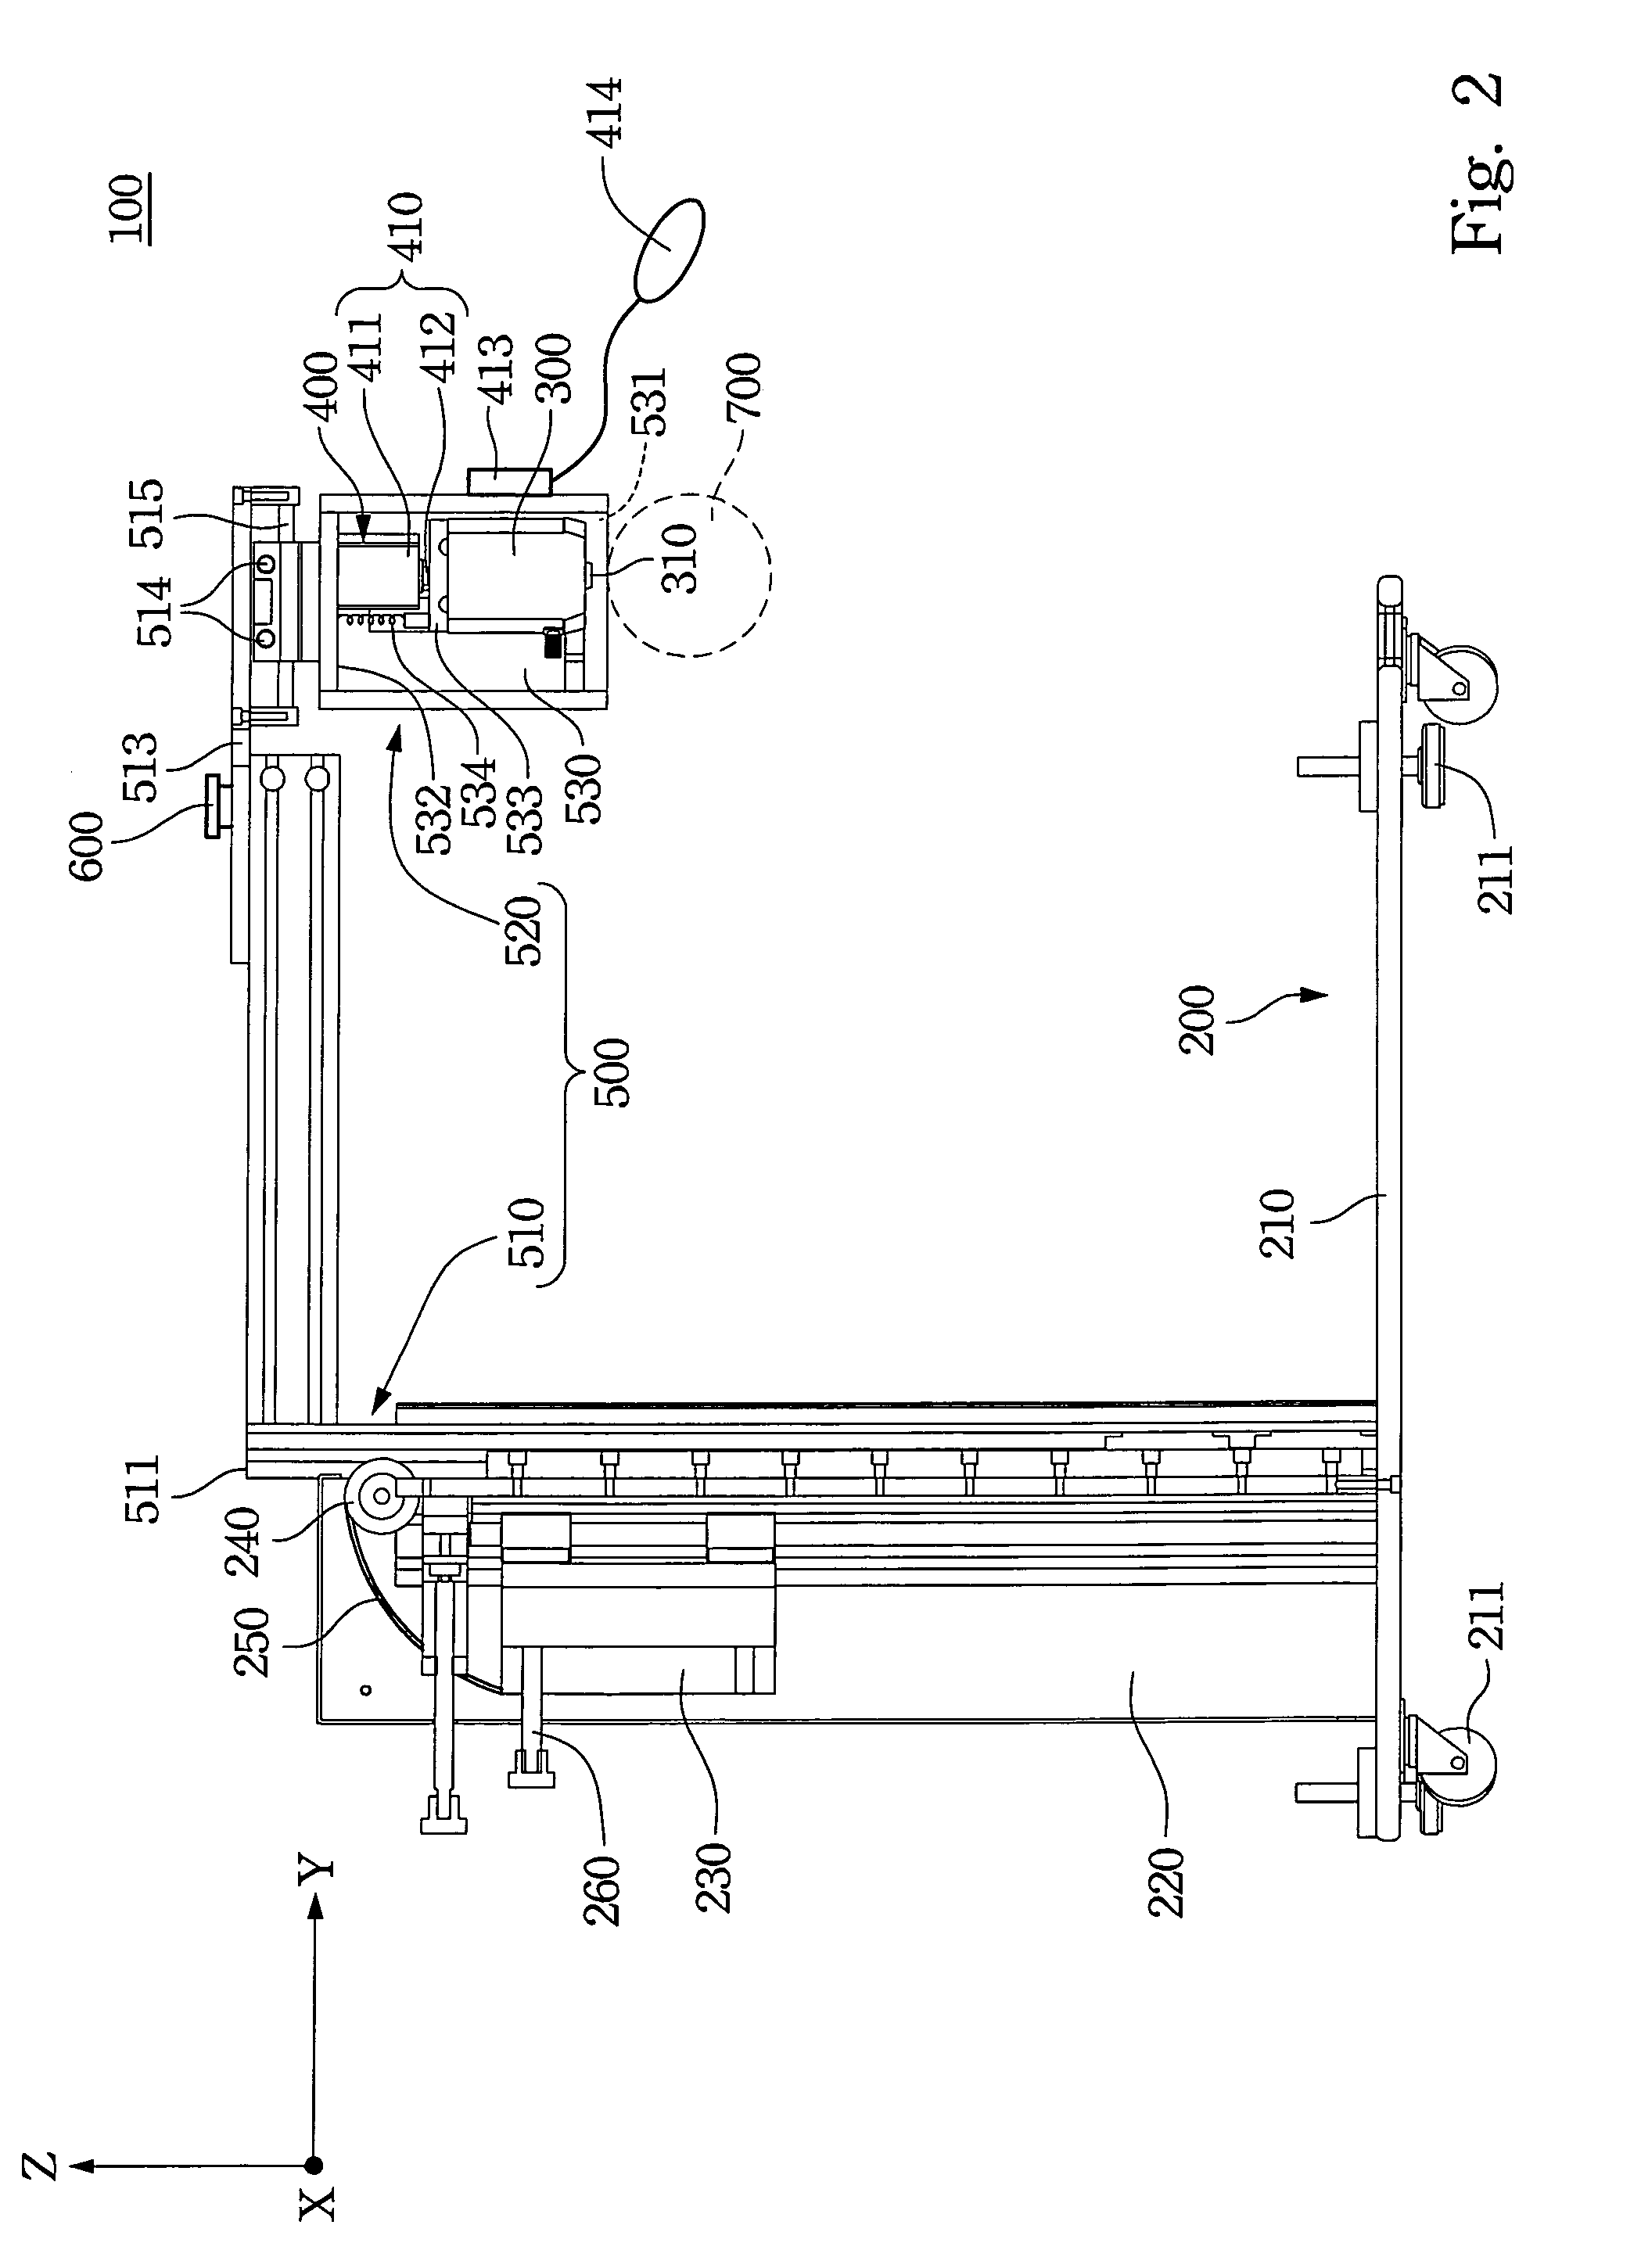 Vibration wave output instrument and method of using the same